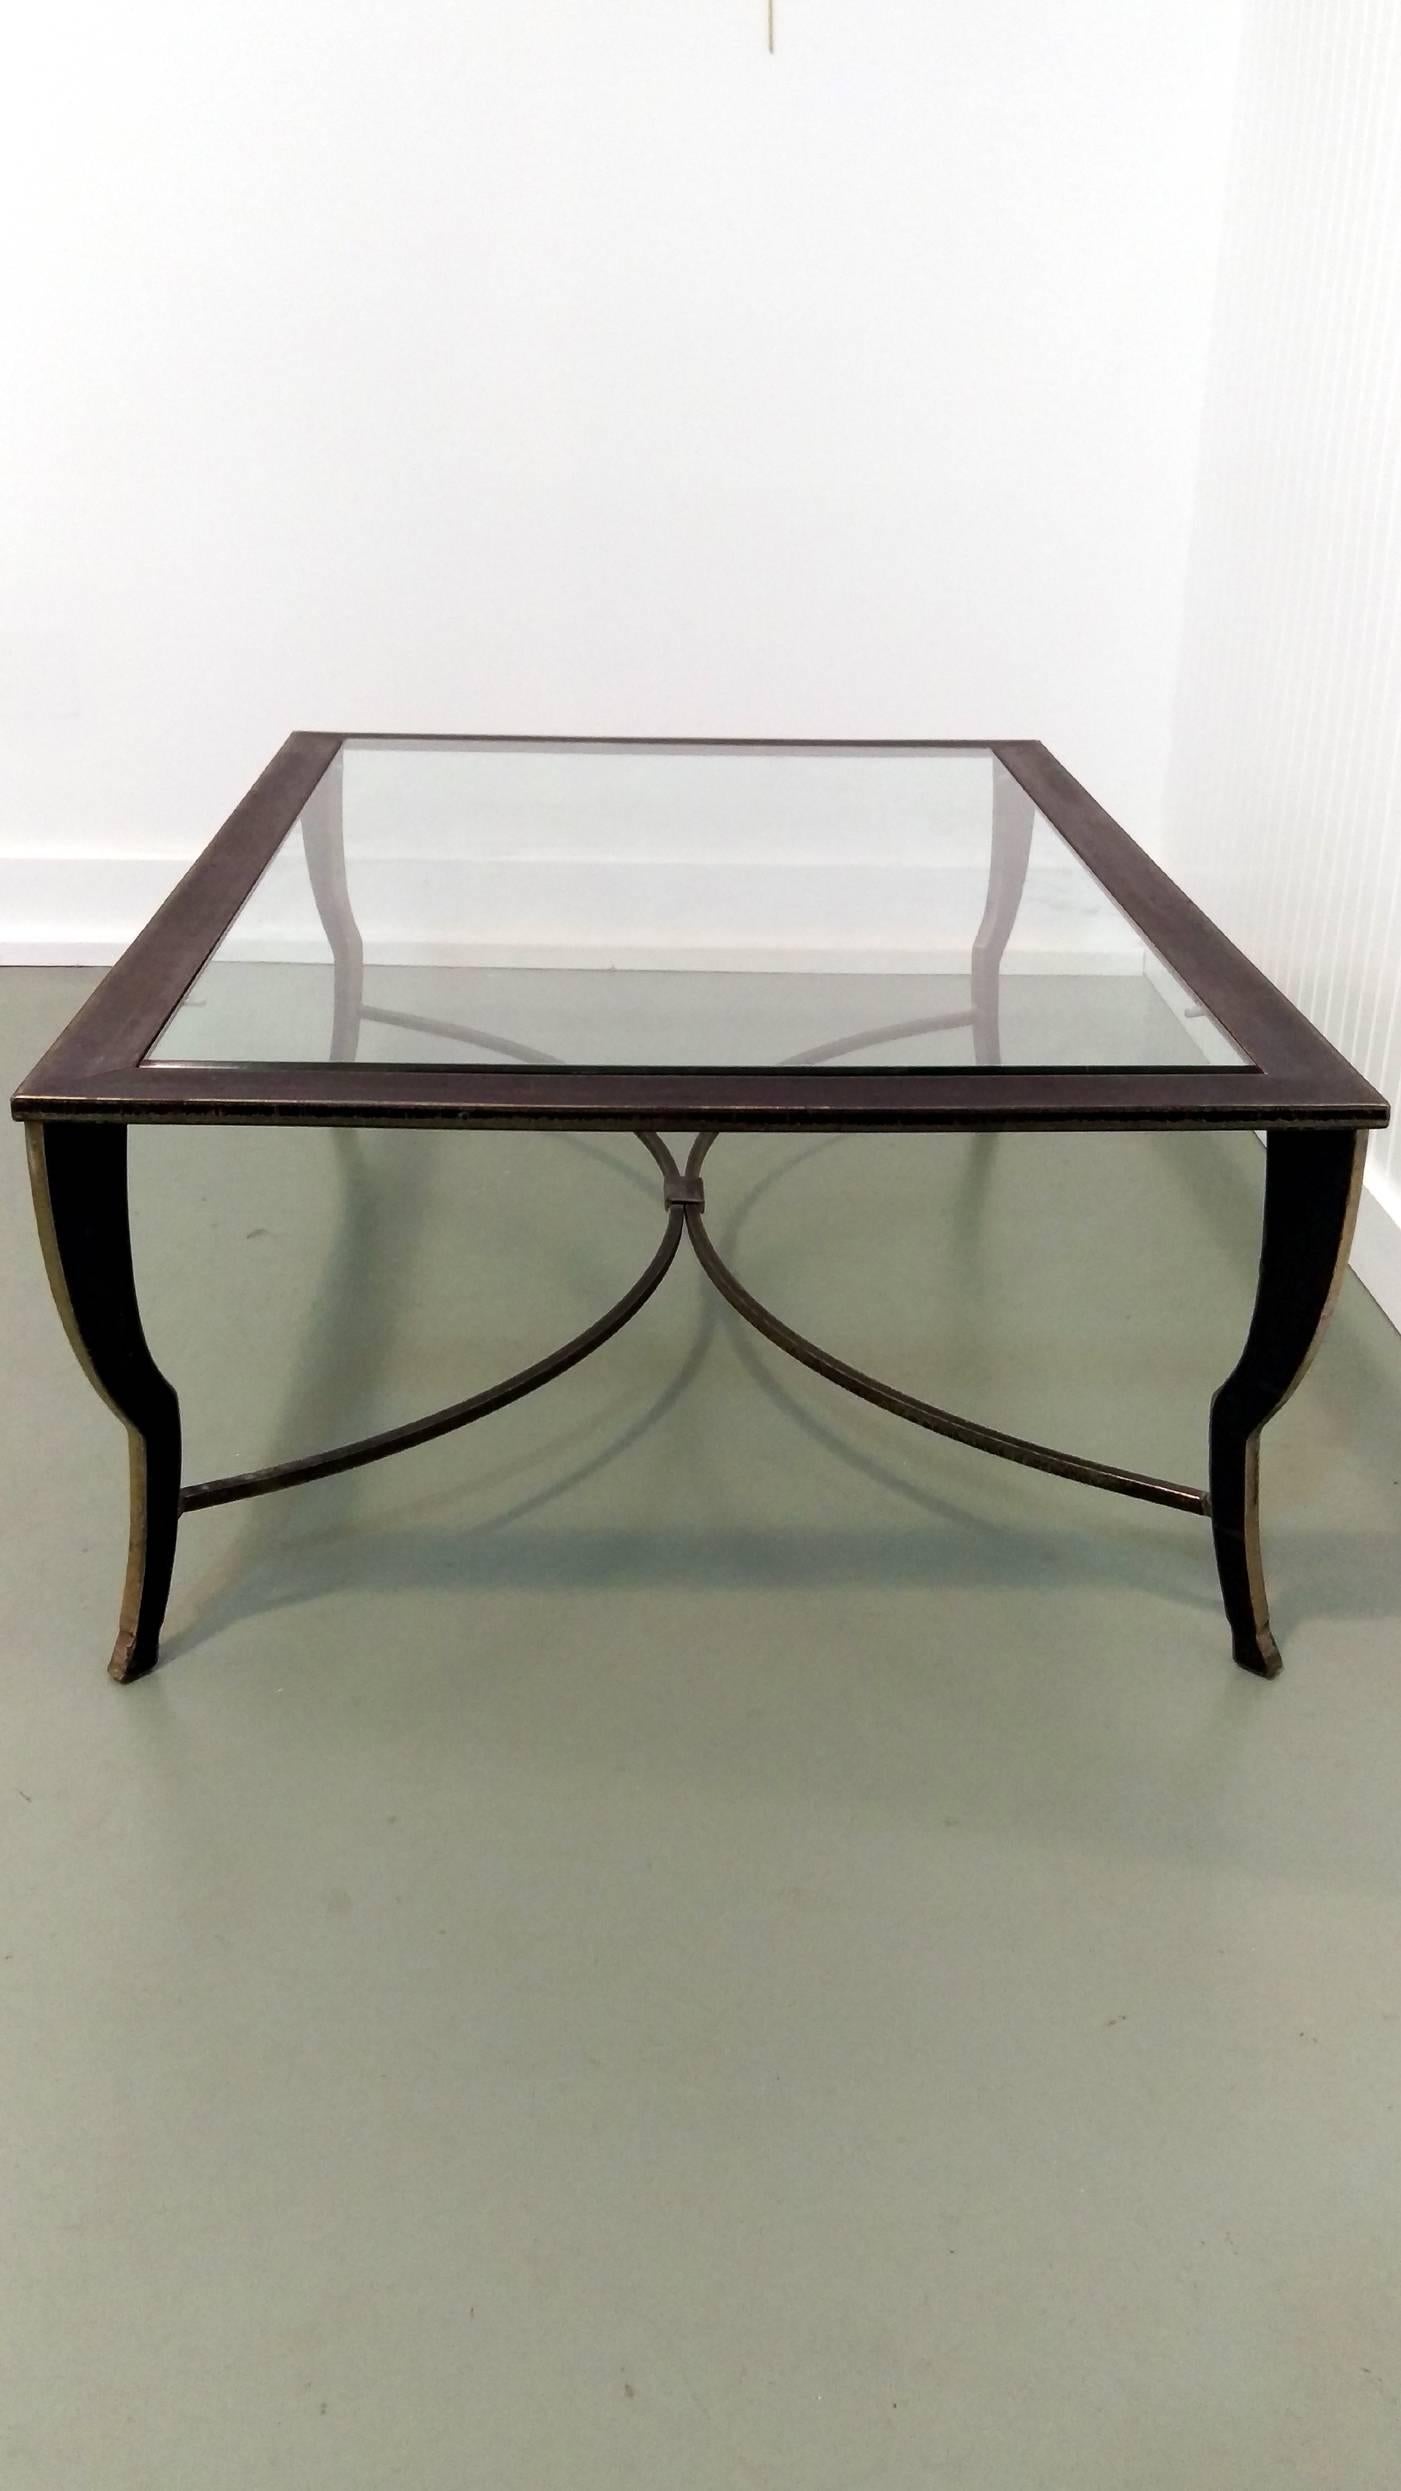 Modern Maison Ramsay Gilded Wrought Iron Coffee Table, offered by La Porte For Sale